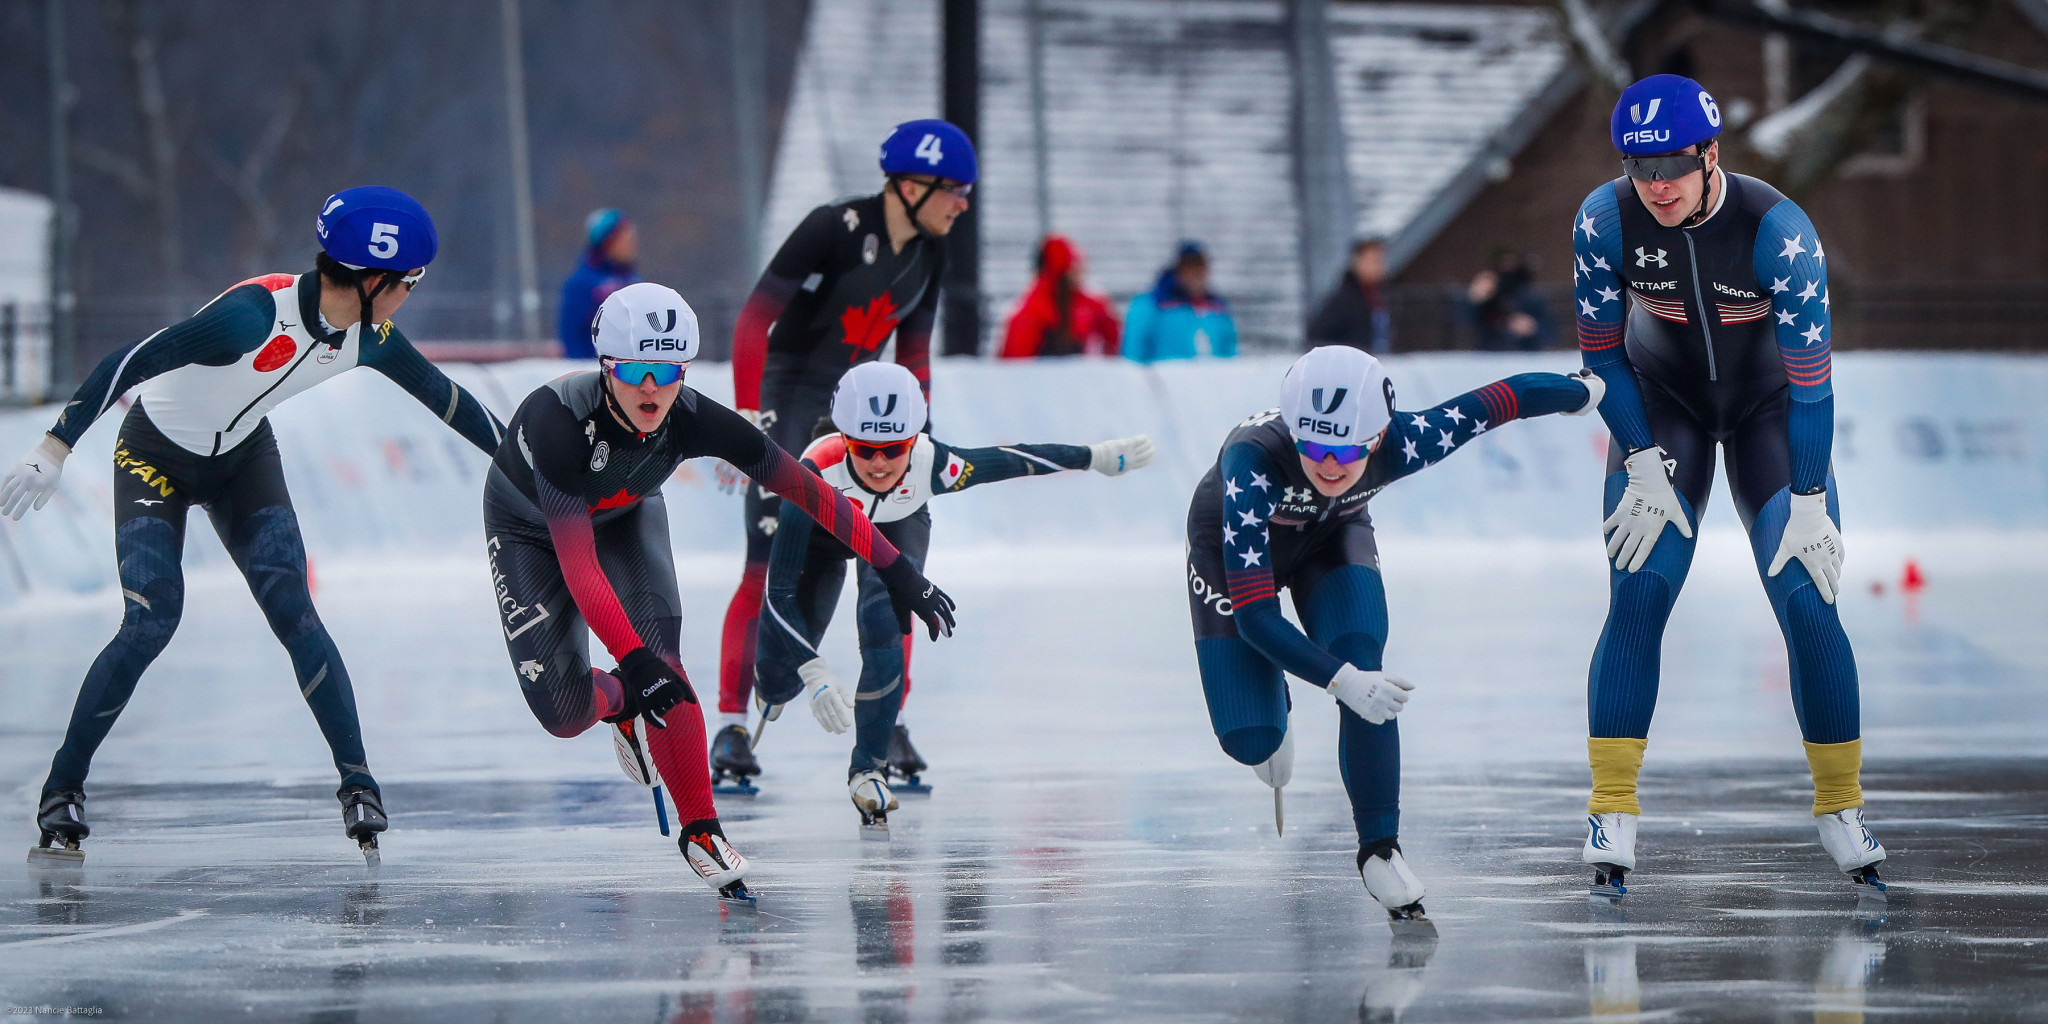 The mixed gender relay speed skating event made its Winter World University Games debut today in Lake Placid ©FISU